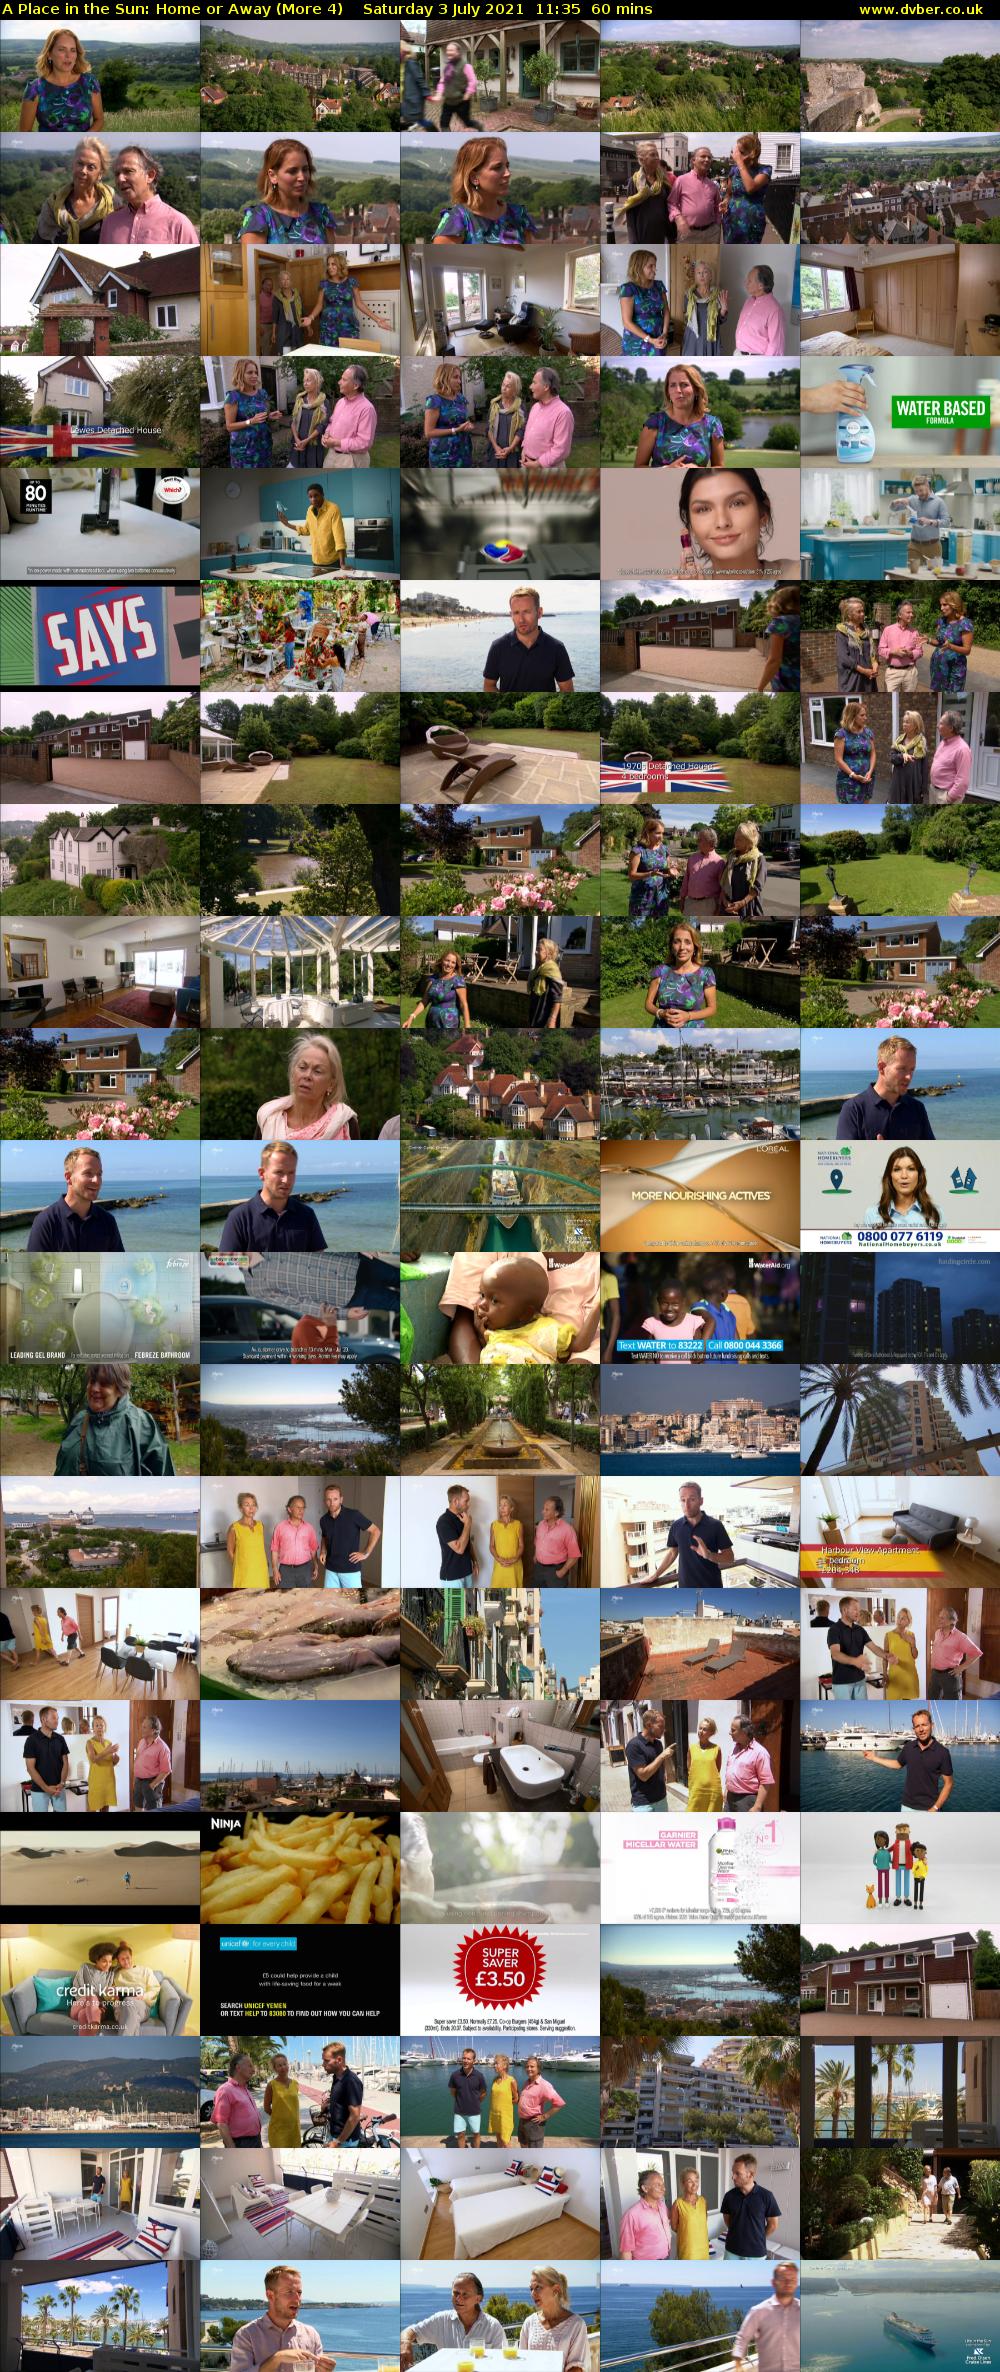 A Place in the Sun: Home or Away (More 4) Saturday 3 July 2021 11:35 - 12:35